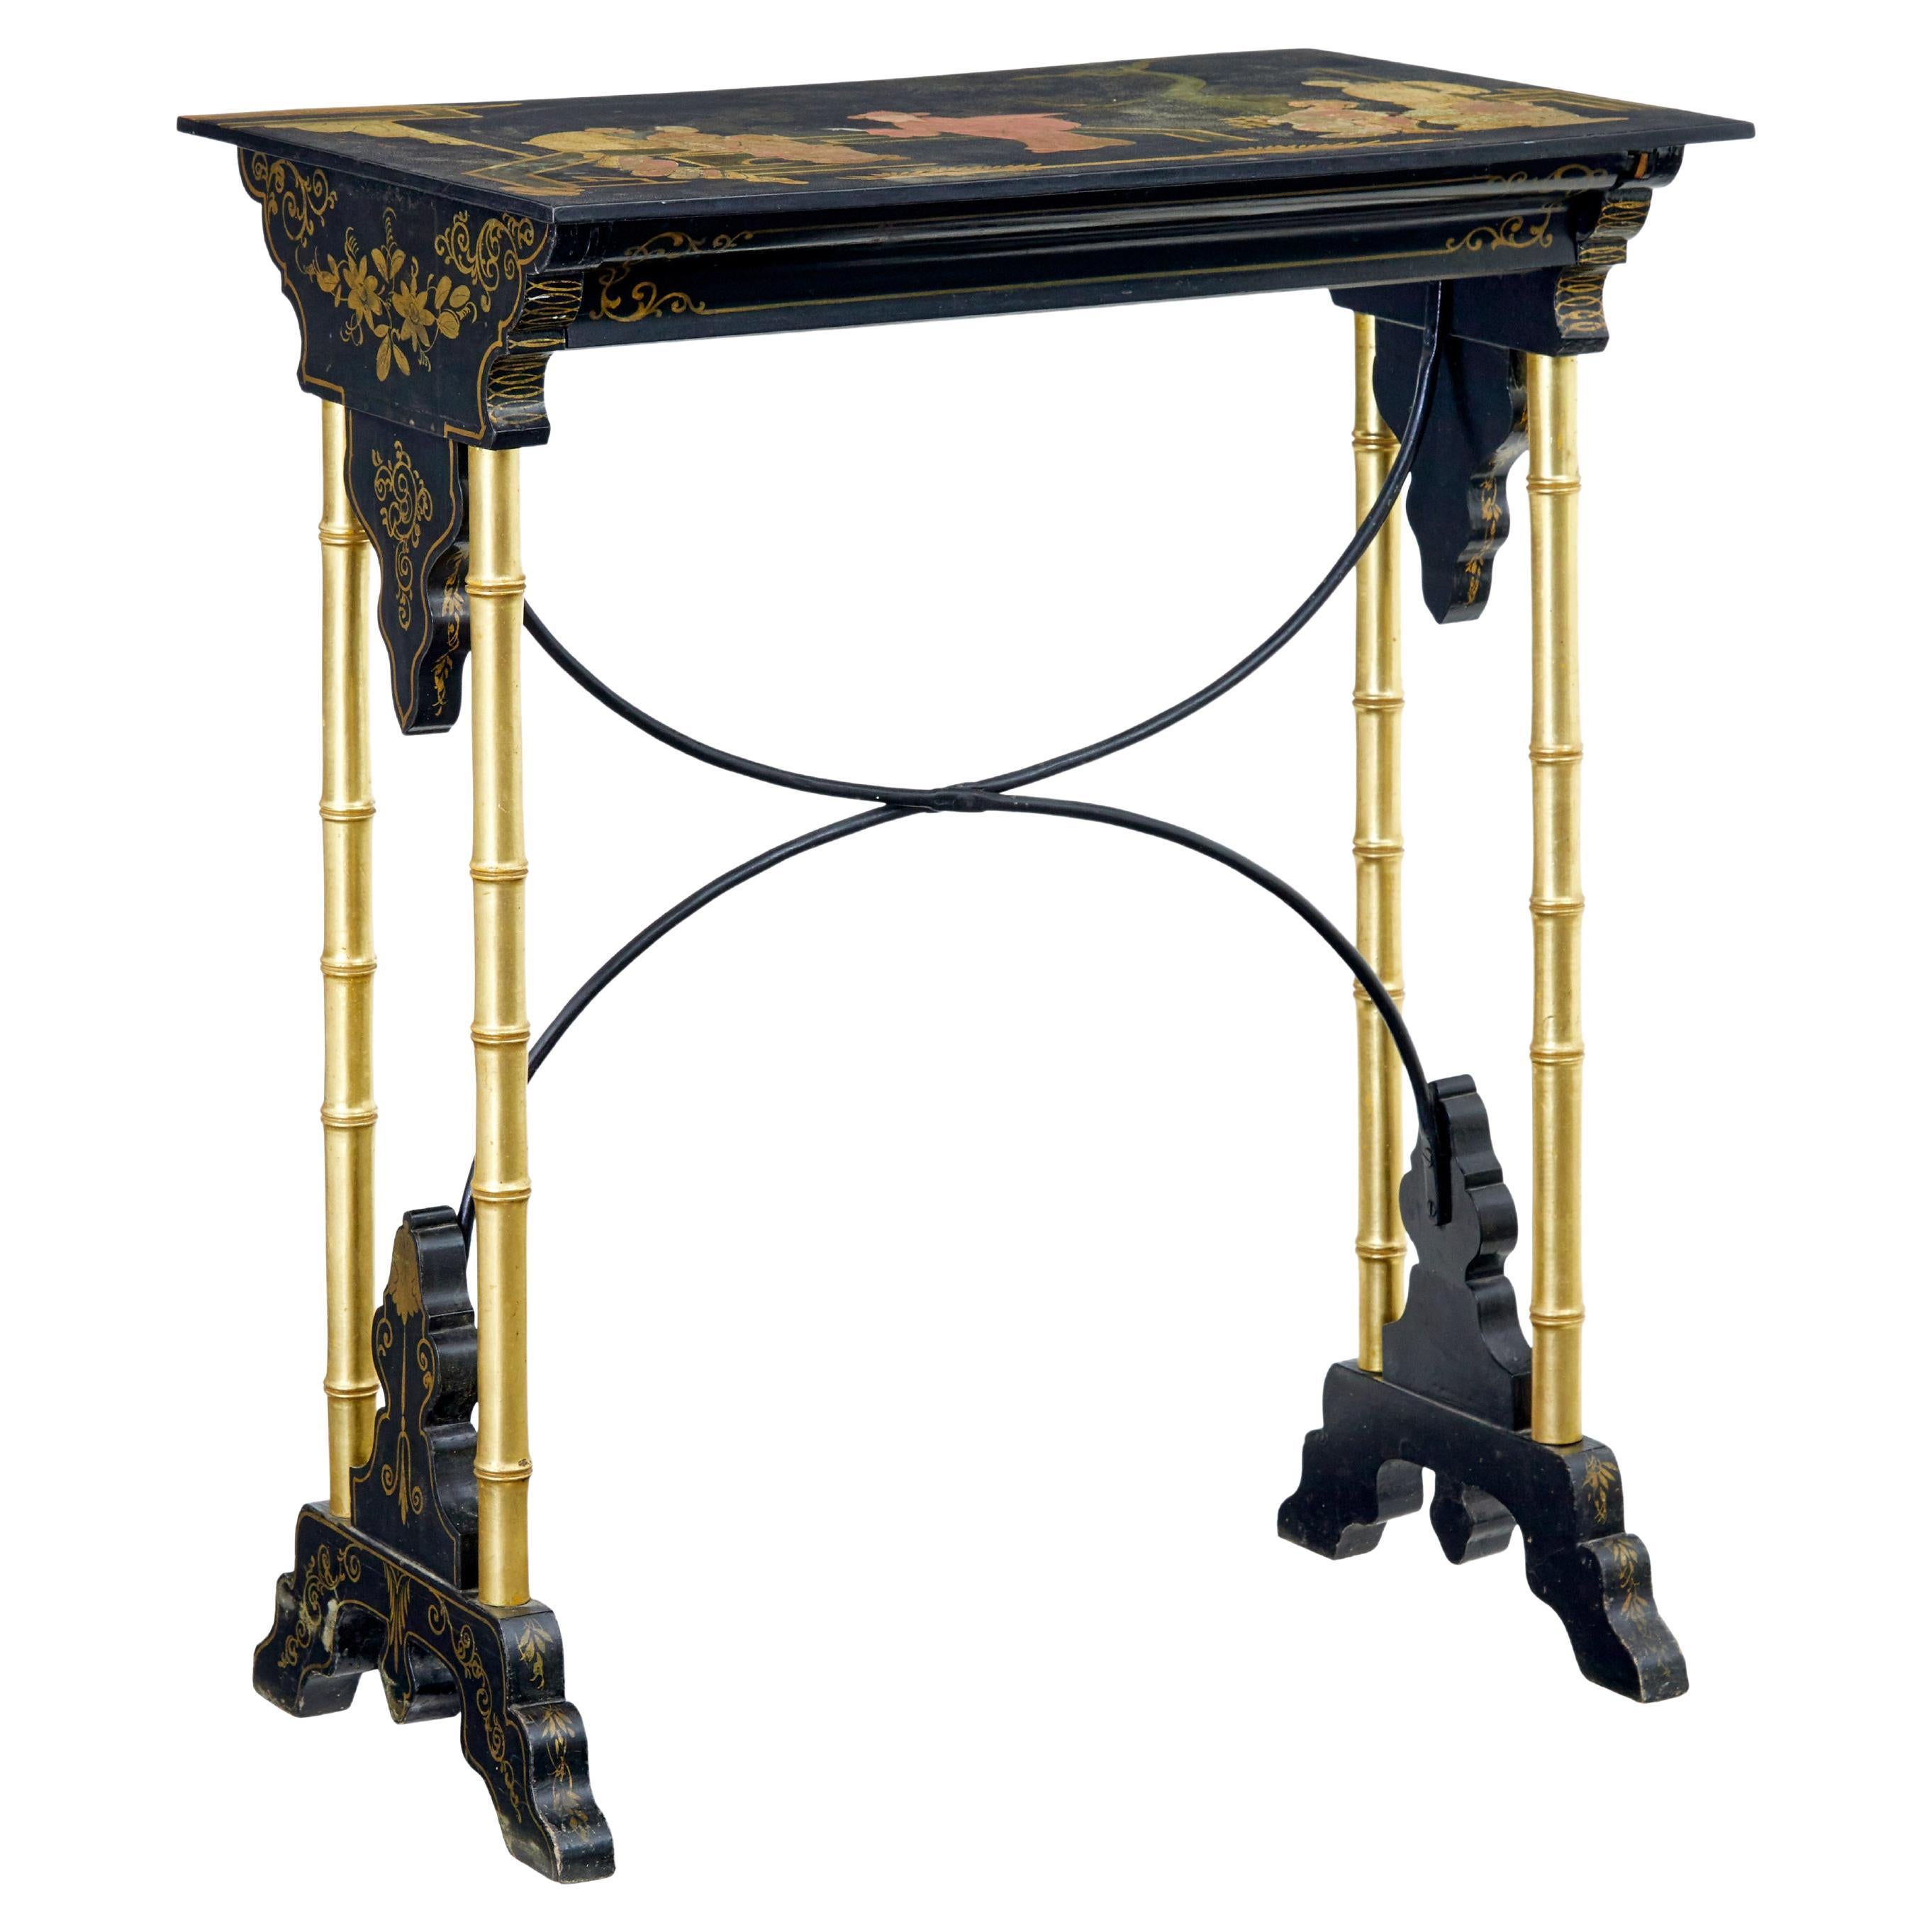 Late 19th Century Japanese Black Lacquer and Gilt Occasional Table